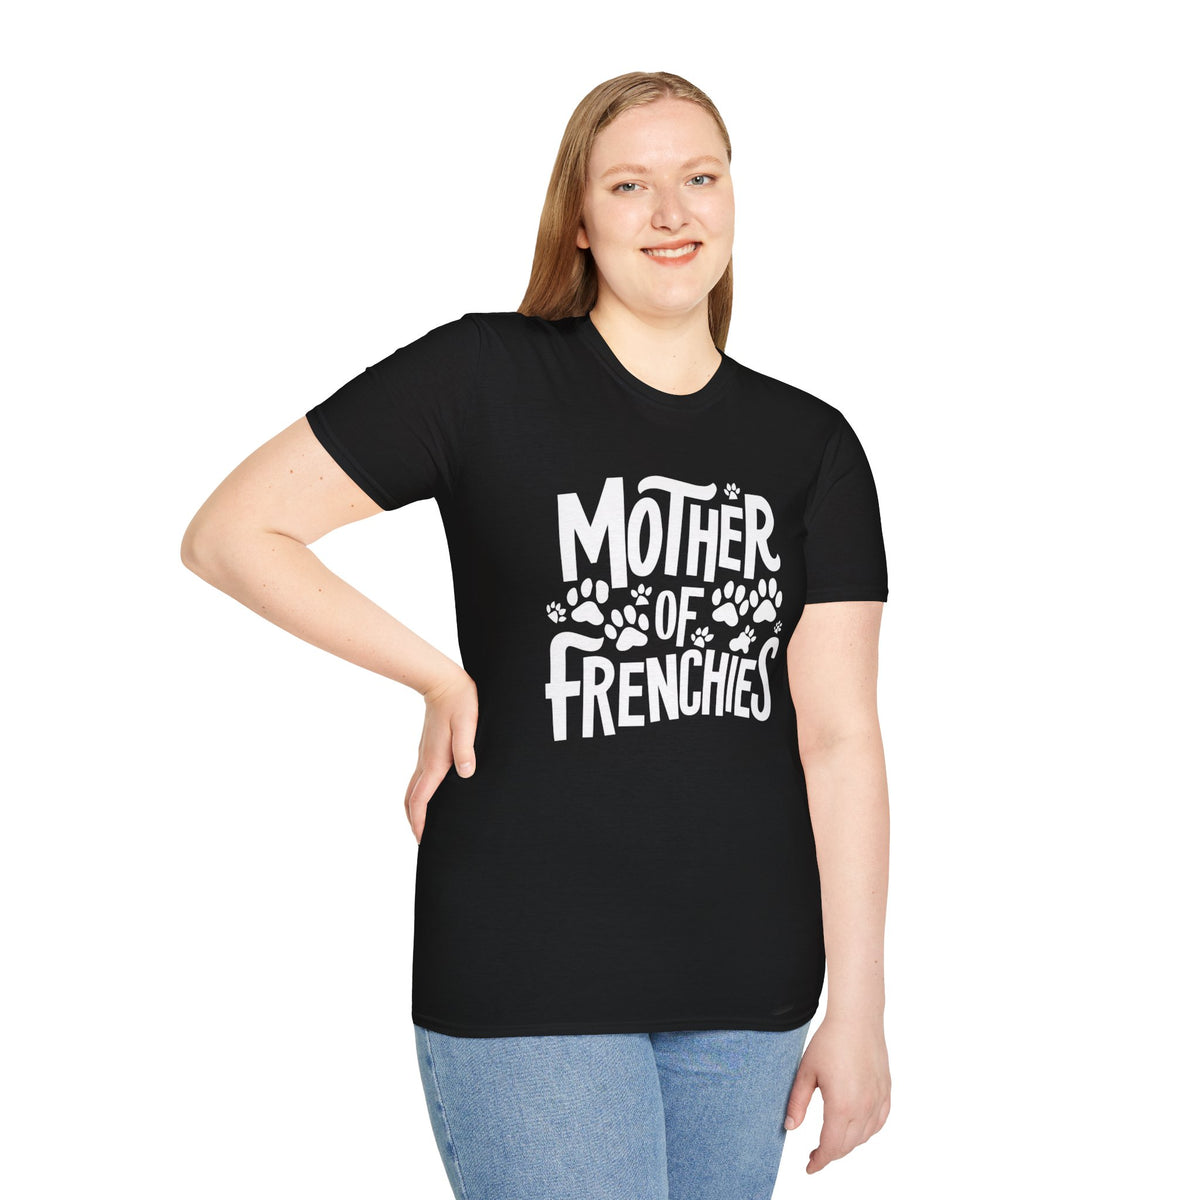 Mother of Frenchie - FRENCH BULLDOG T-SHIRT